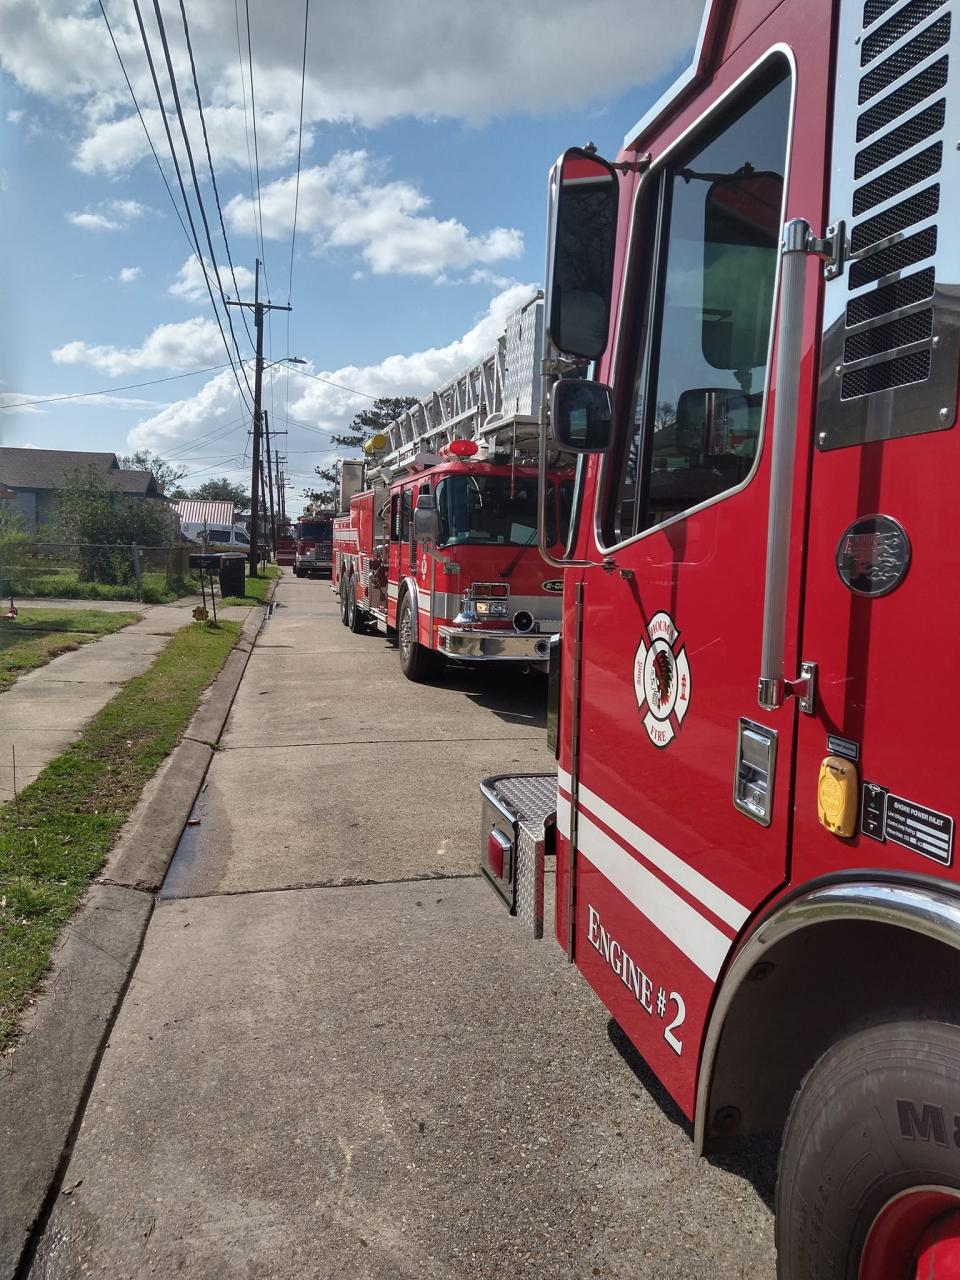 Get a close-up view of fire trucks and other vehicles that serve your community during an event Saturday in Houma.